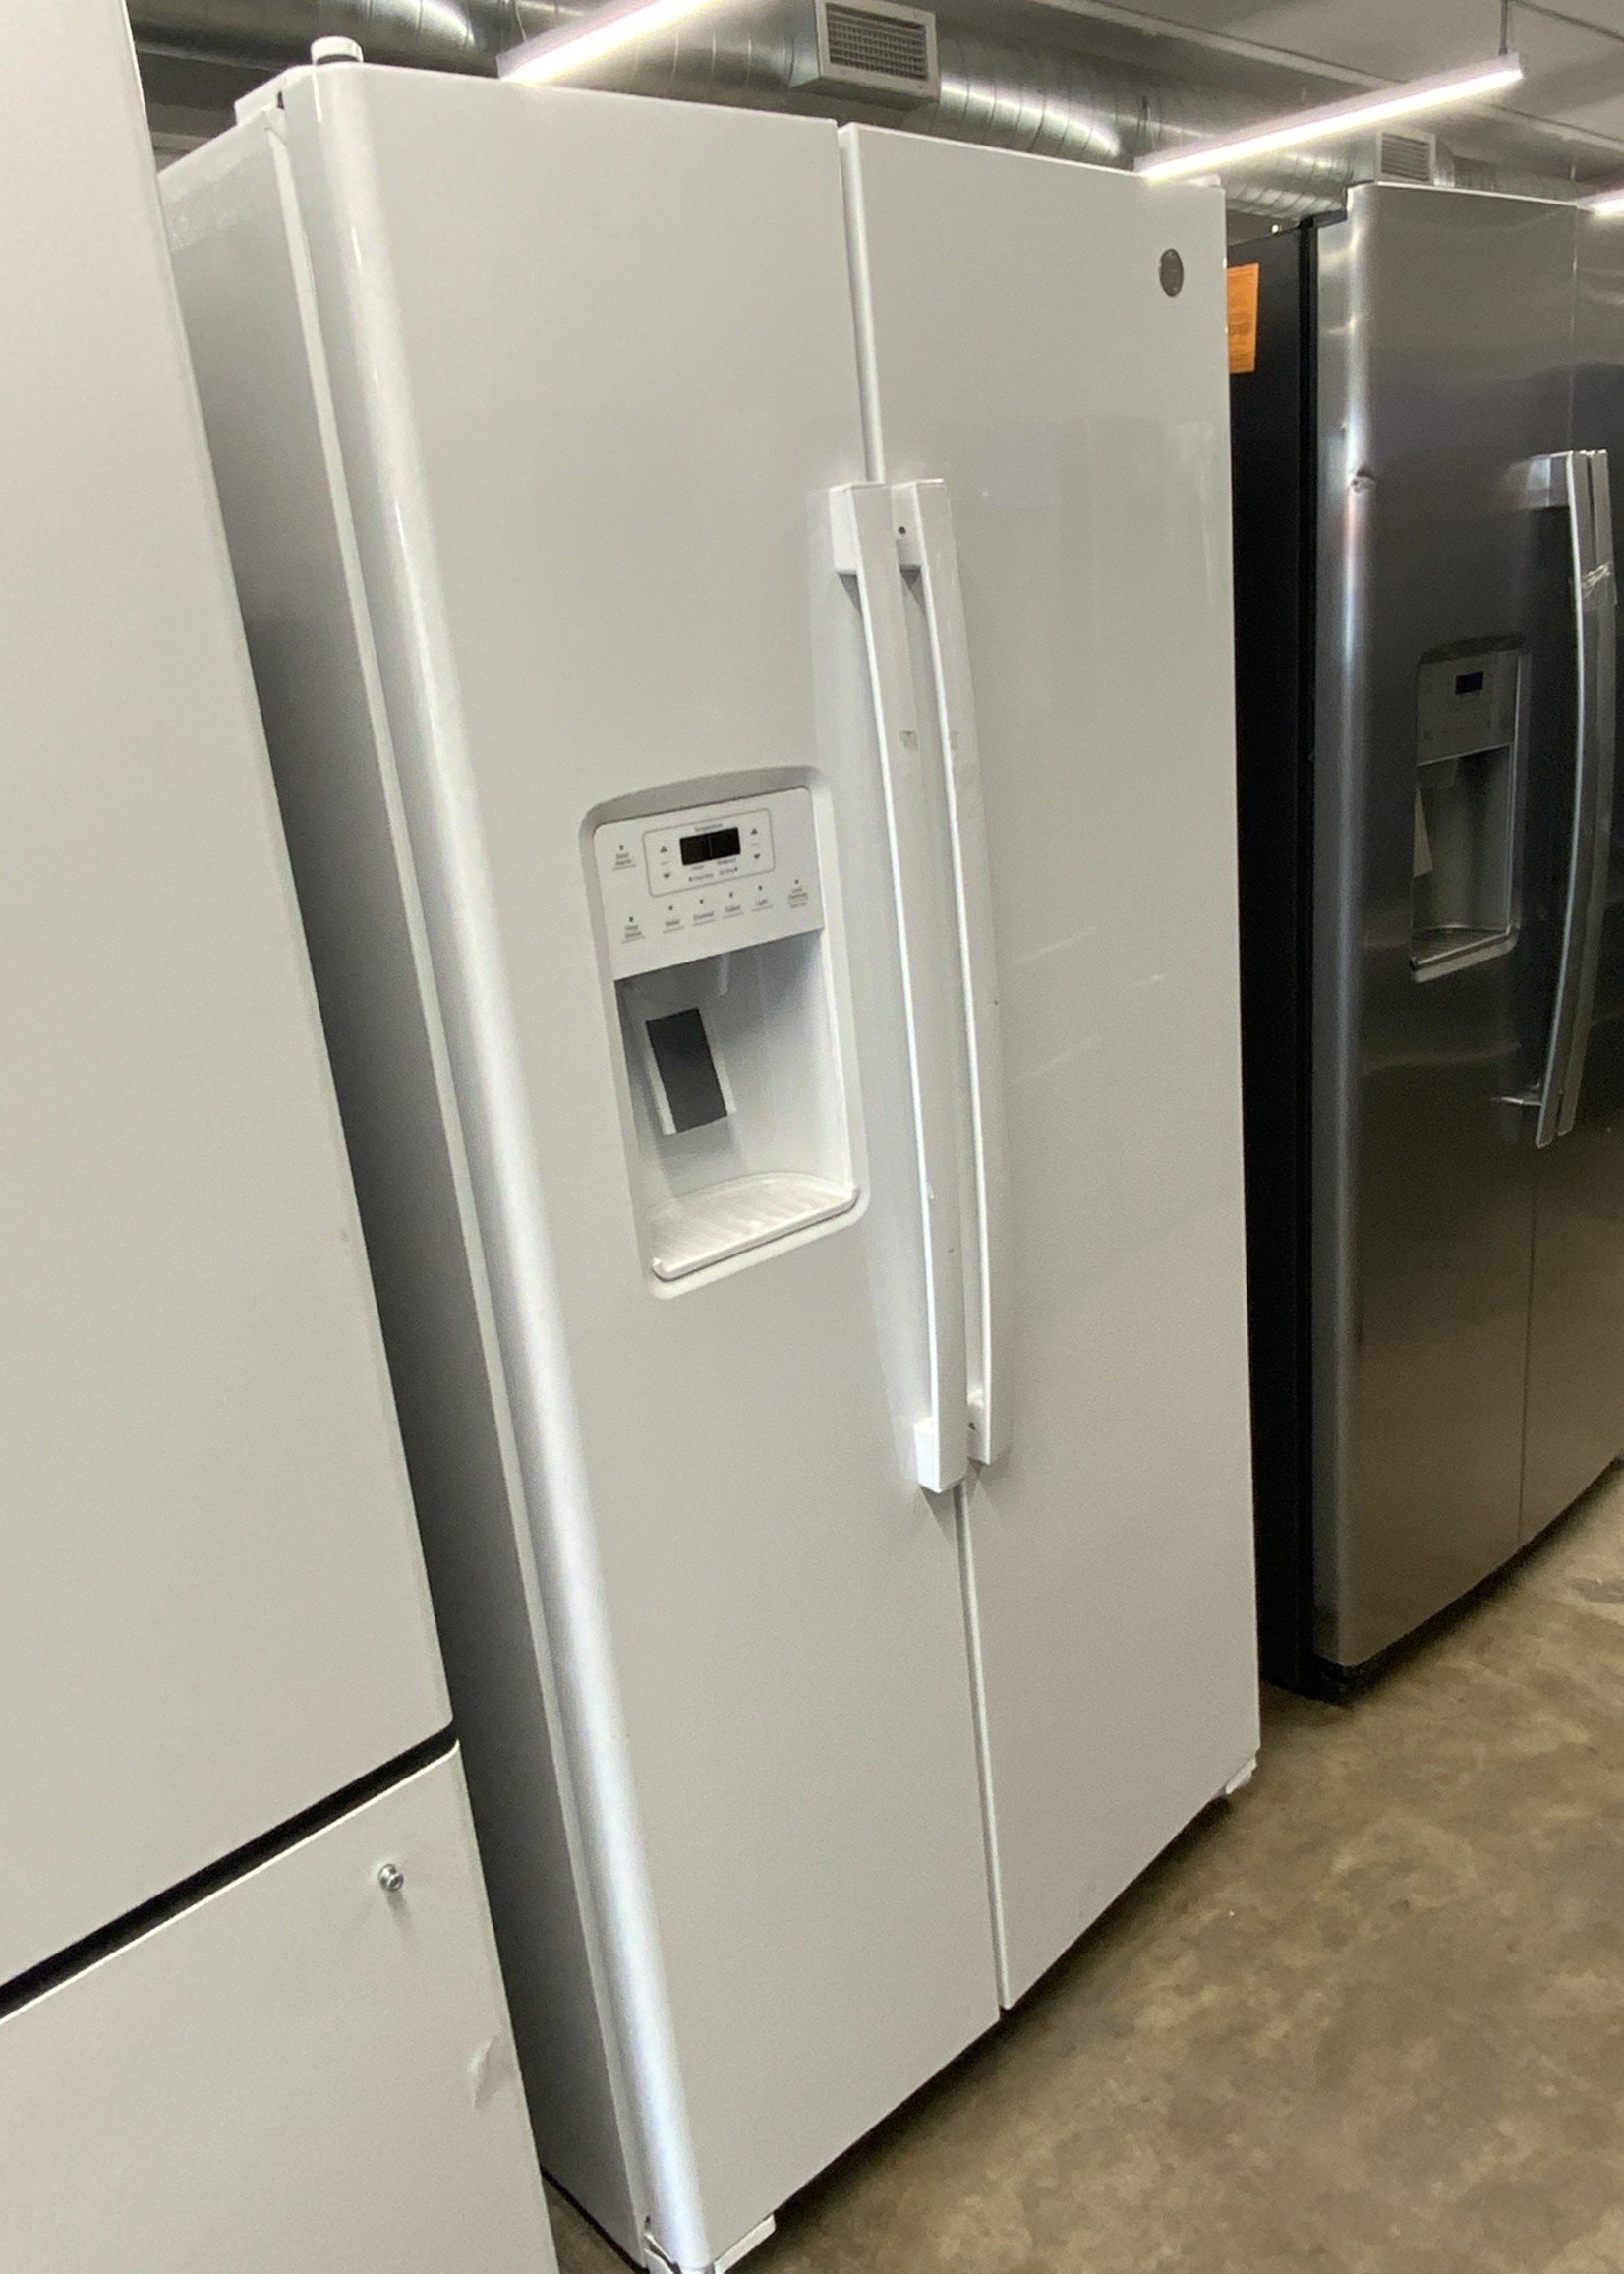 GE GE 21.9 cu. ft. Side by Side Refrigerator in White, Counter Depth